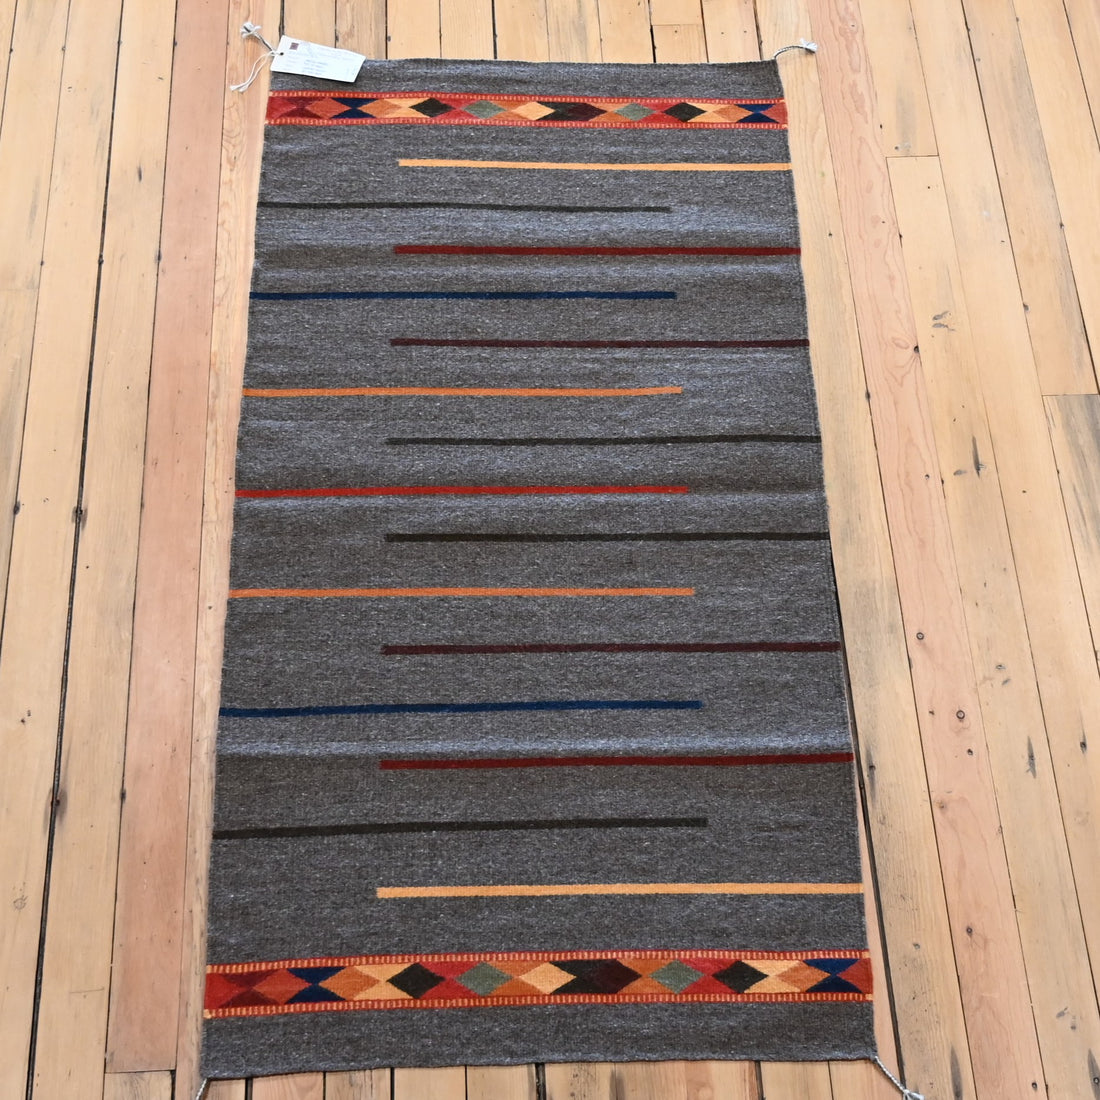 Escalante Rugs Hand Woven by Maritza Montano view of rug